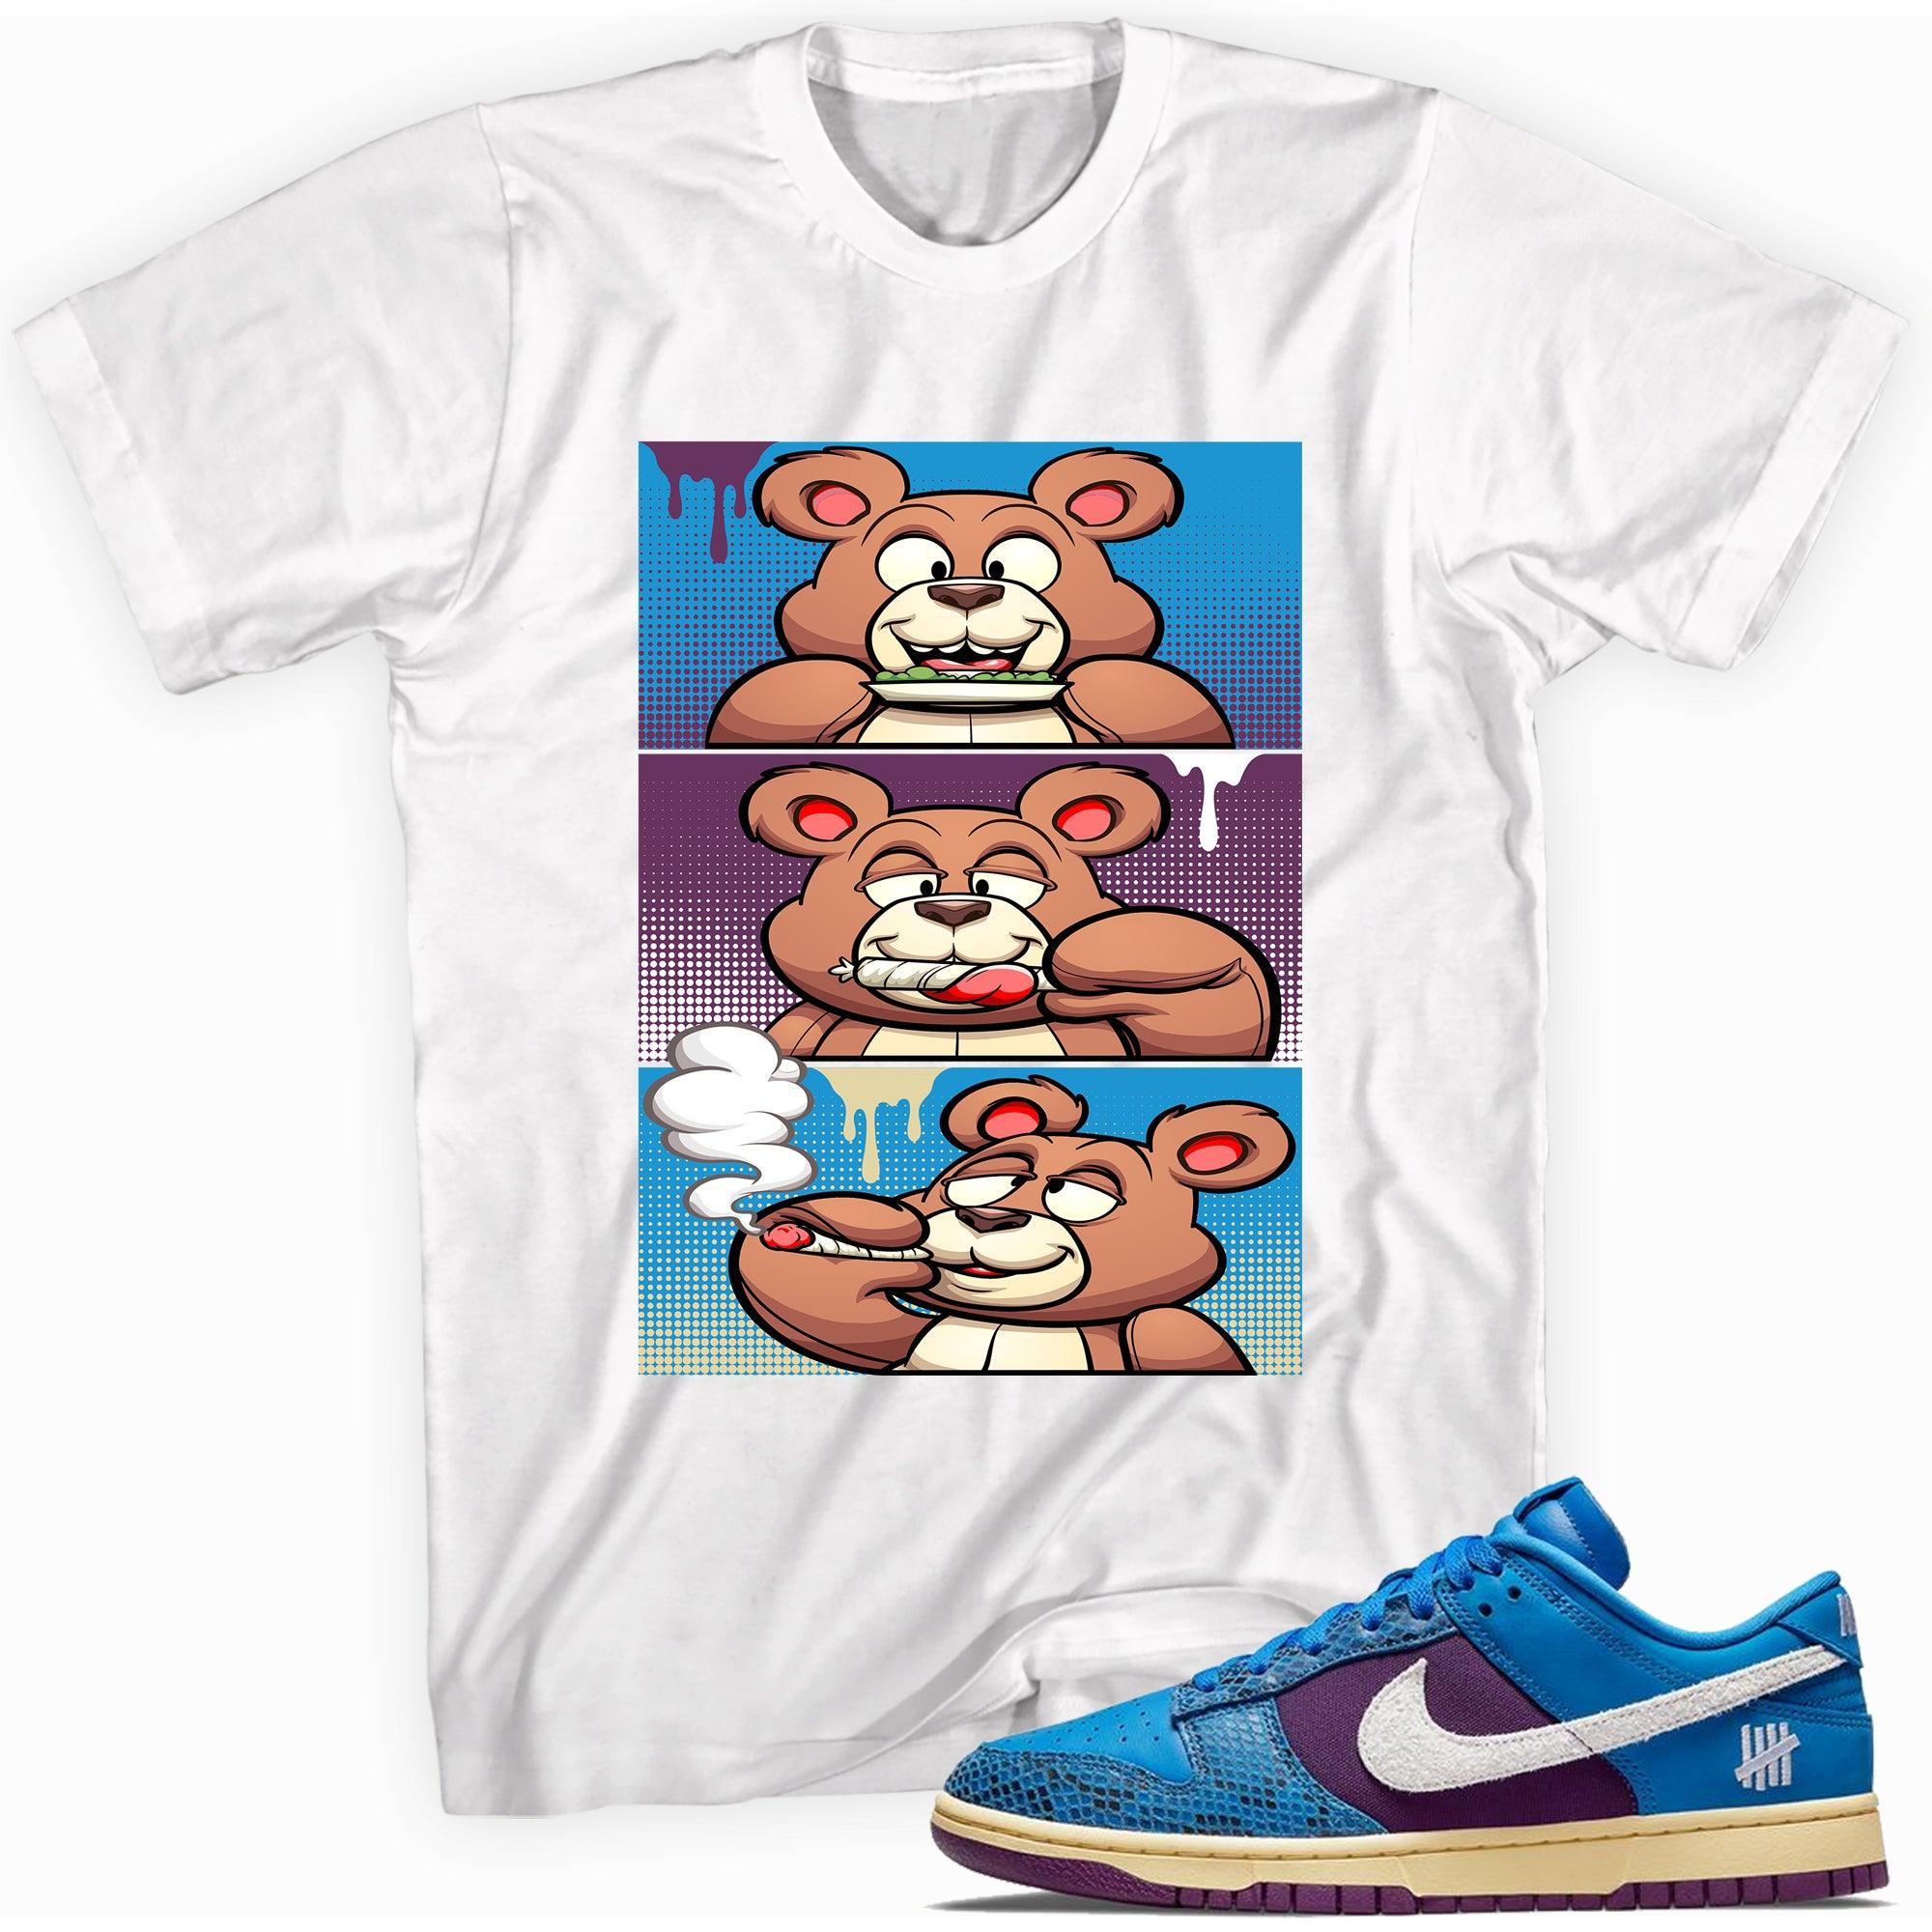 Roll It Shirt Nike Dunk Low Undefeated 5 On It Dunk vs AF1 Sneakers photo